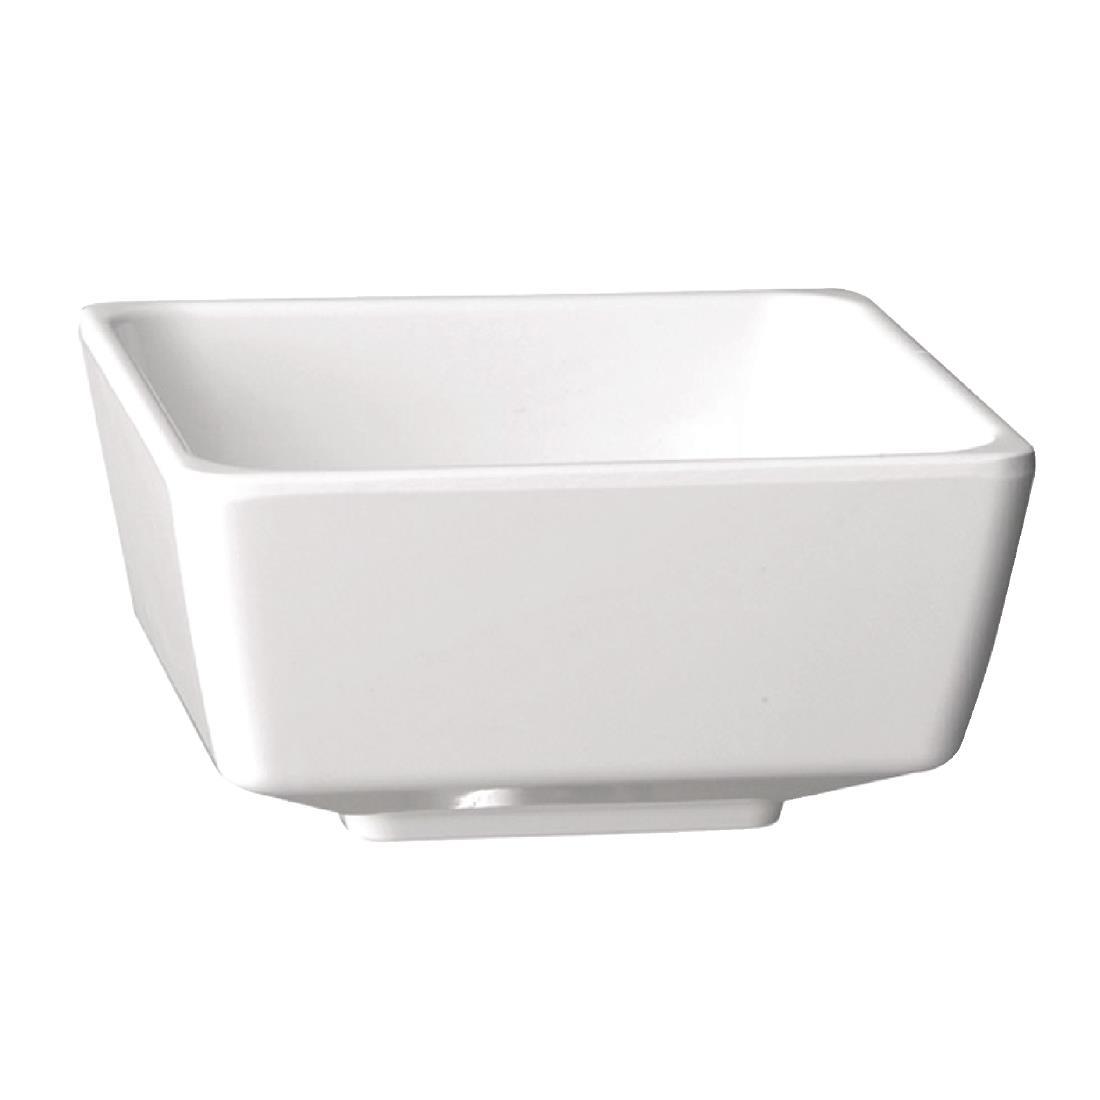 APS Float White Square Bowl 7in - GF096  - 1